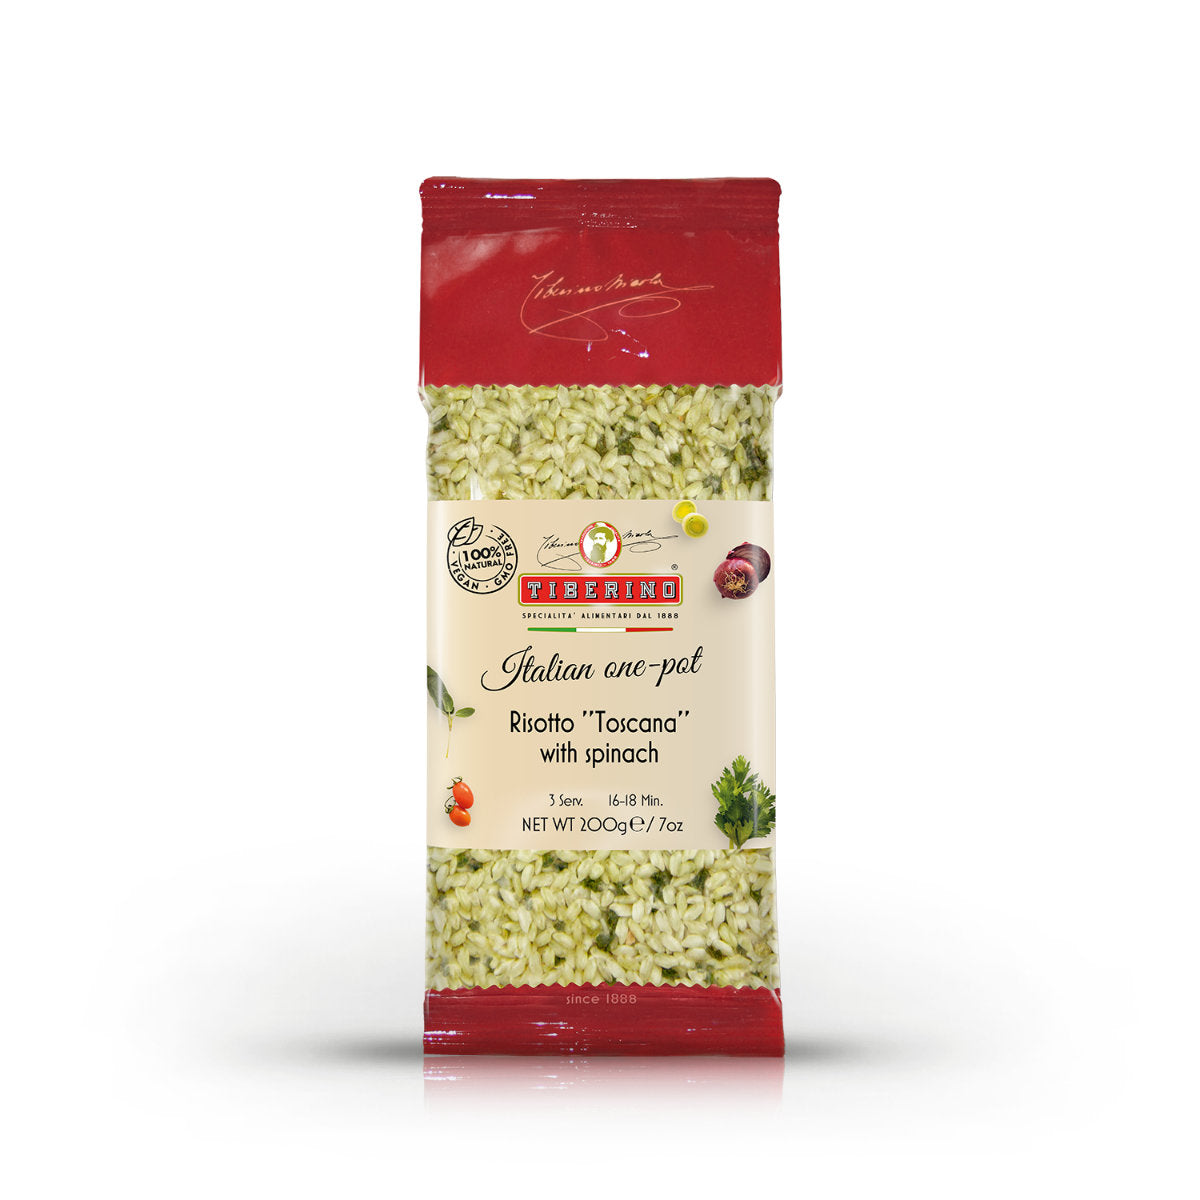 Toscana risotto with spinach & sun-dried tomato